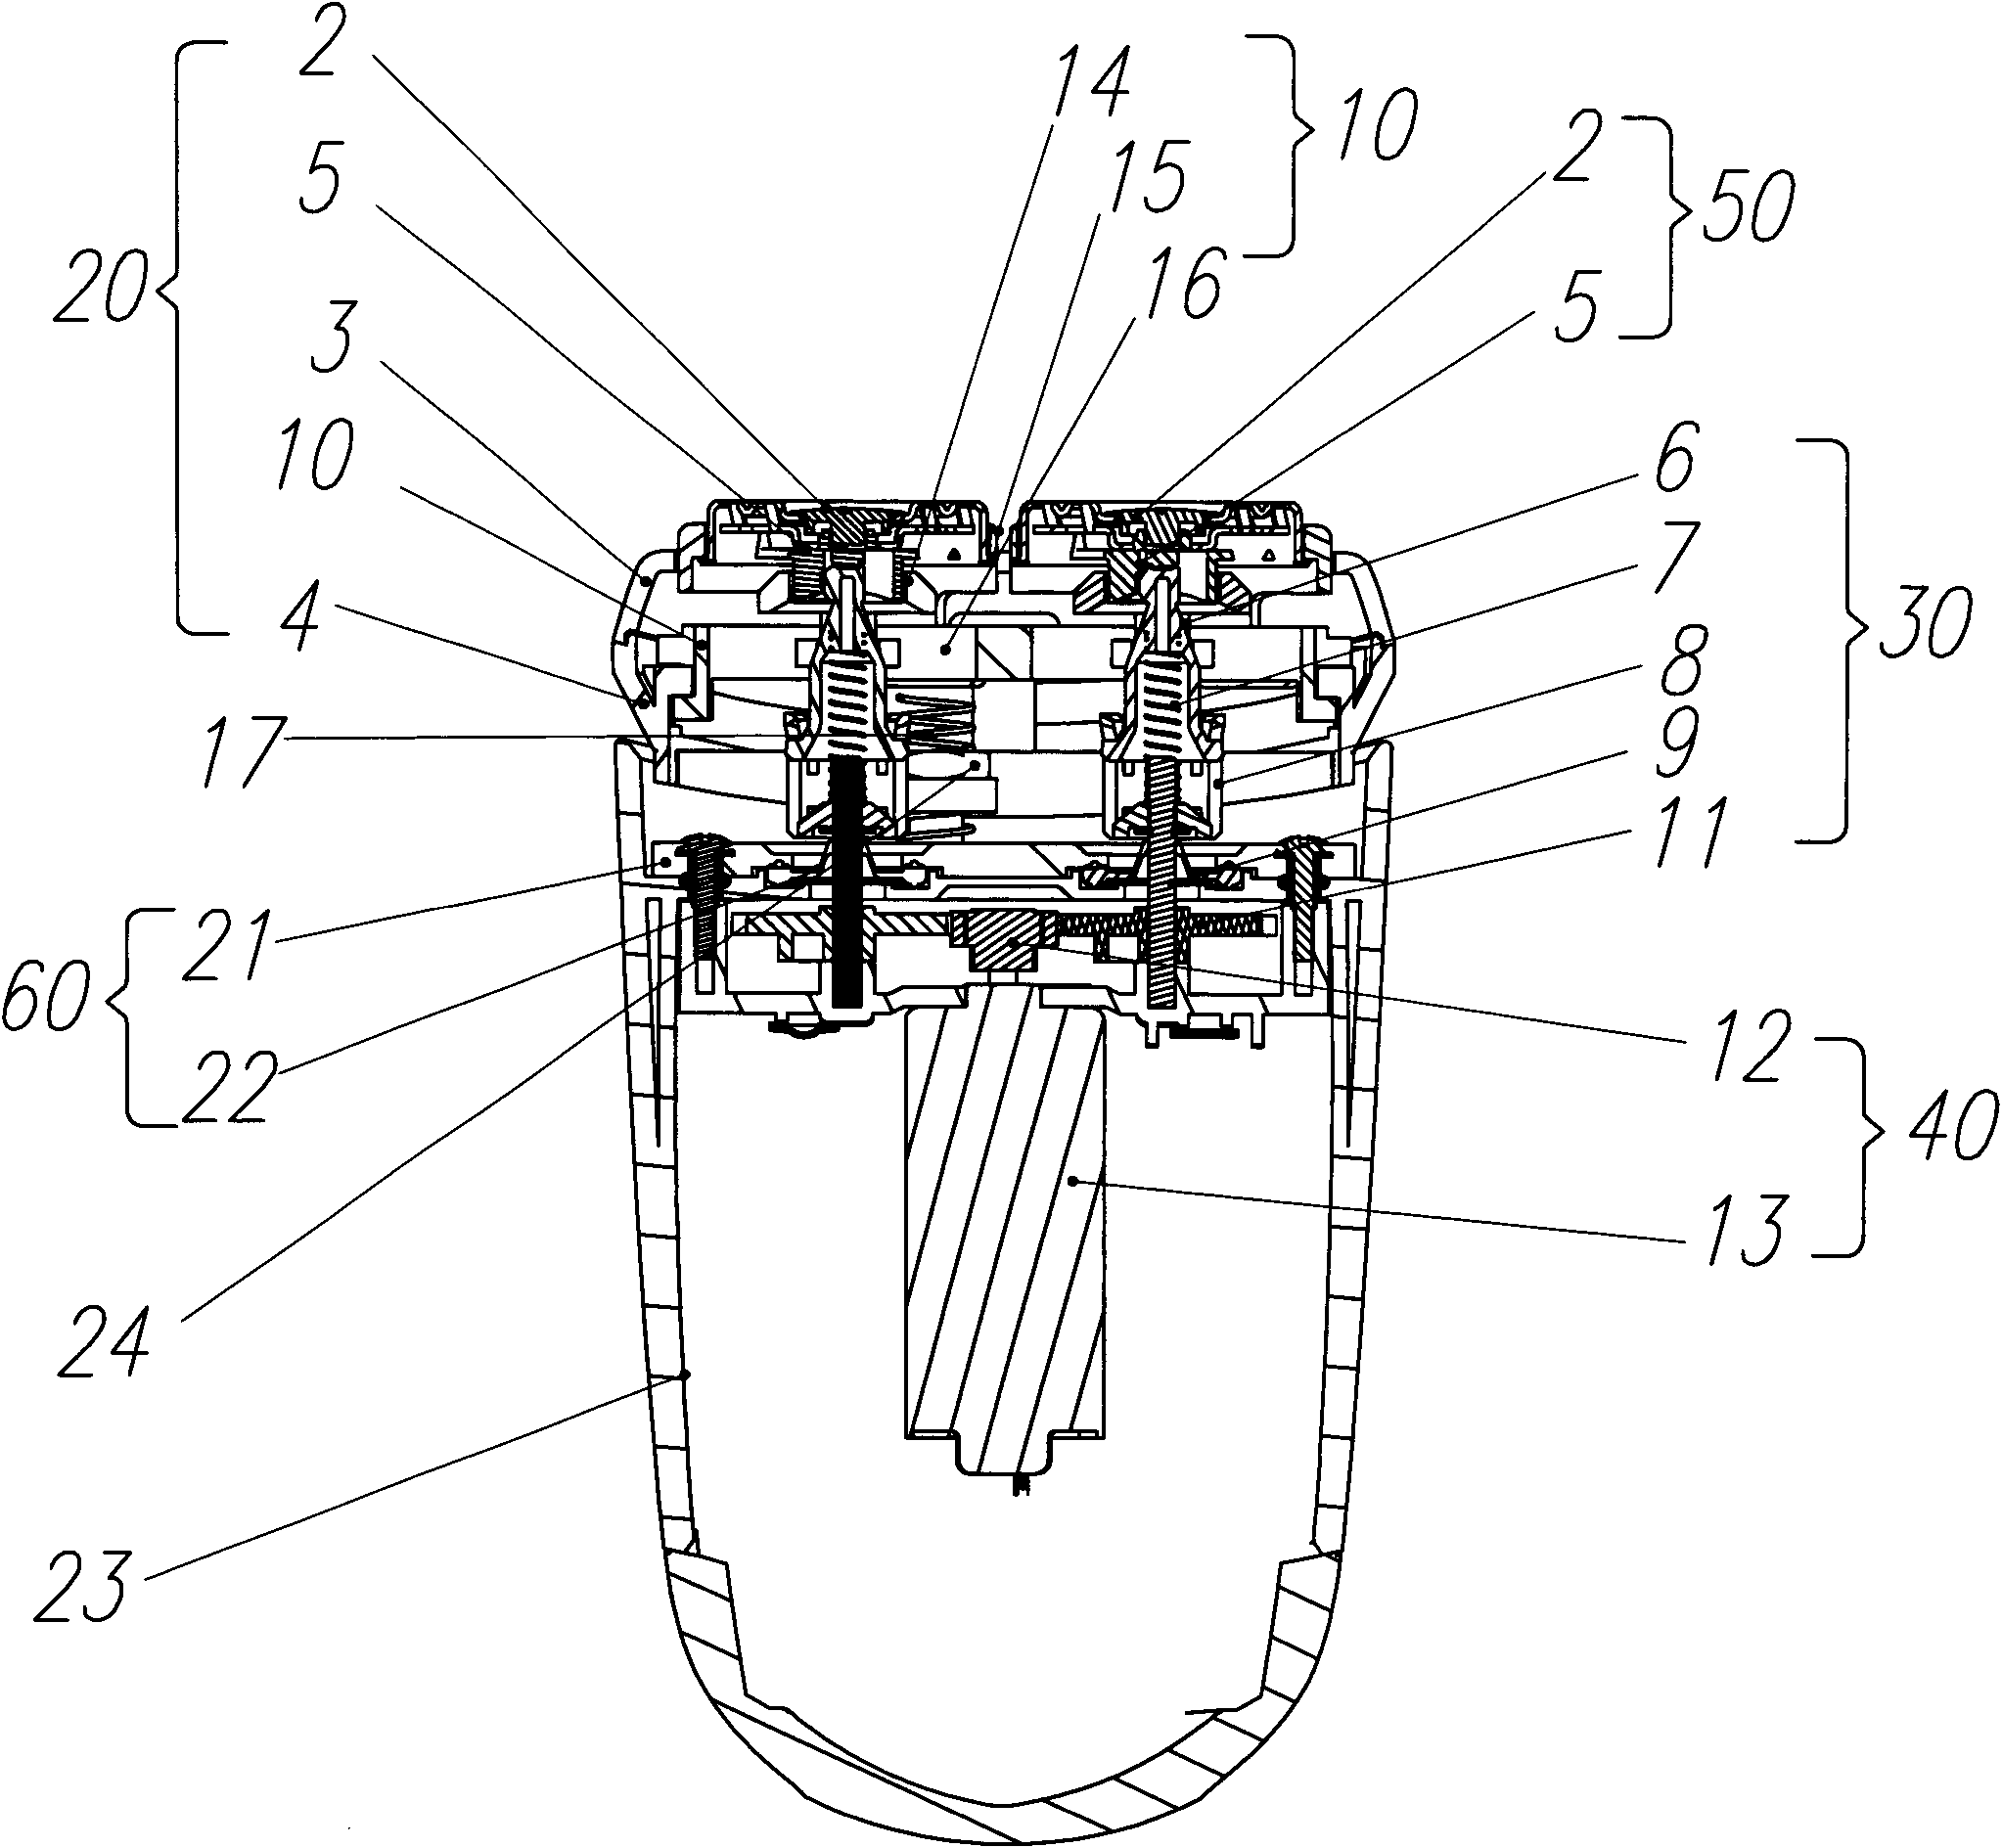 Omni-directionally-floated rotary type shaver